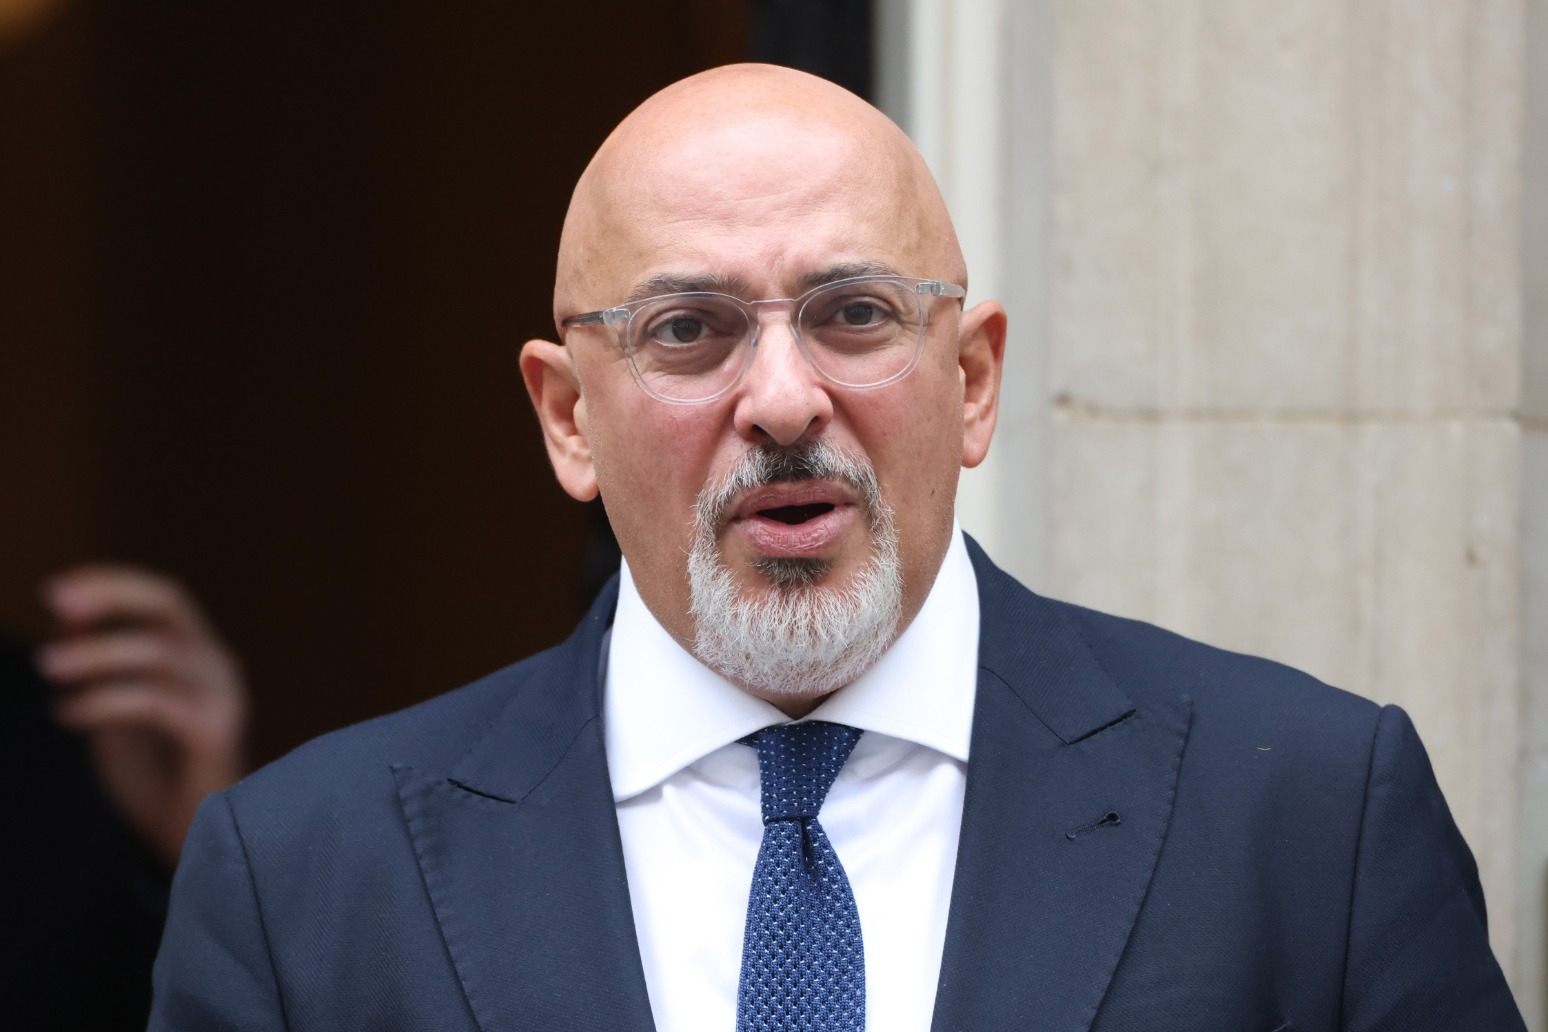 Zahawi says pupils should be allowed to read books containing racial slurs 